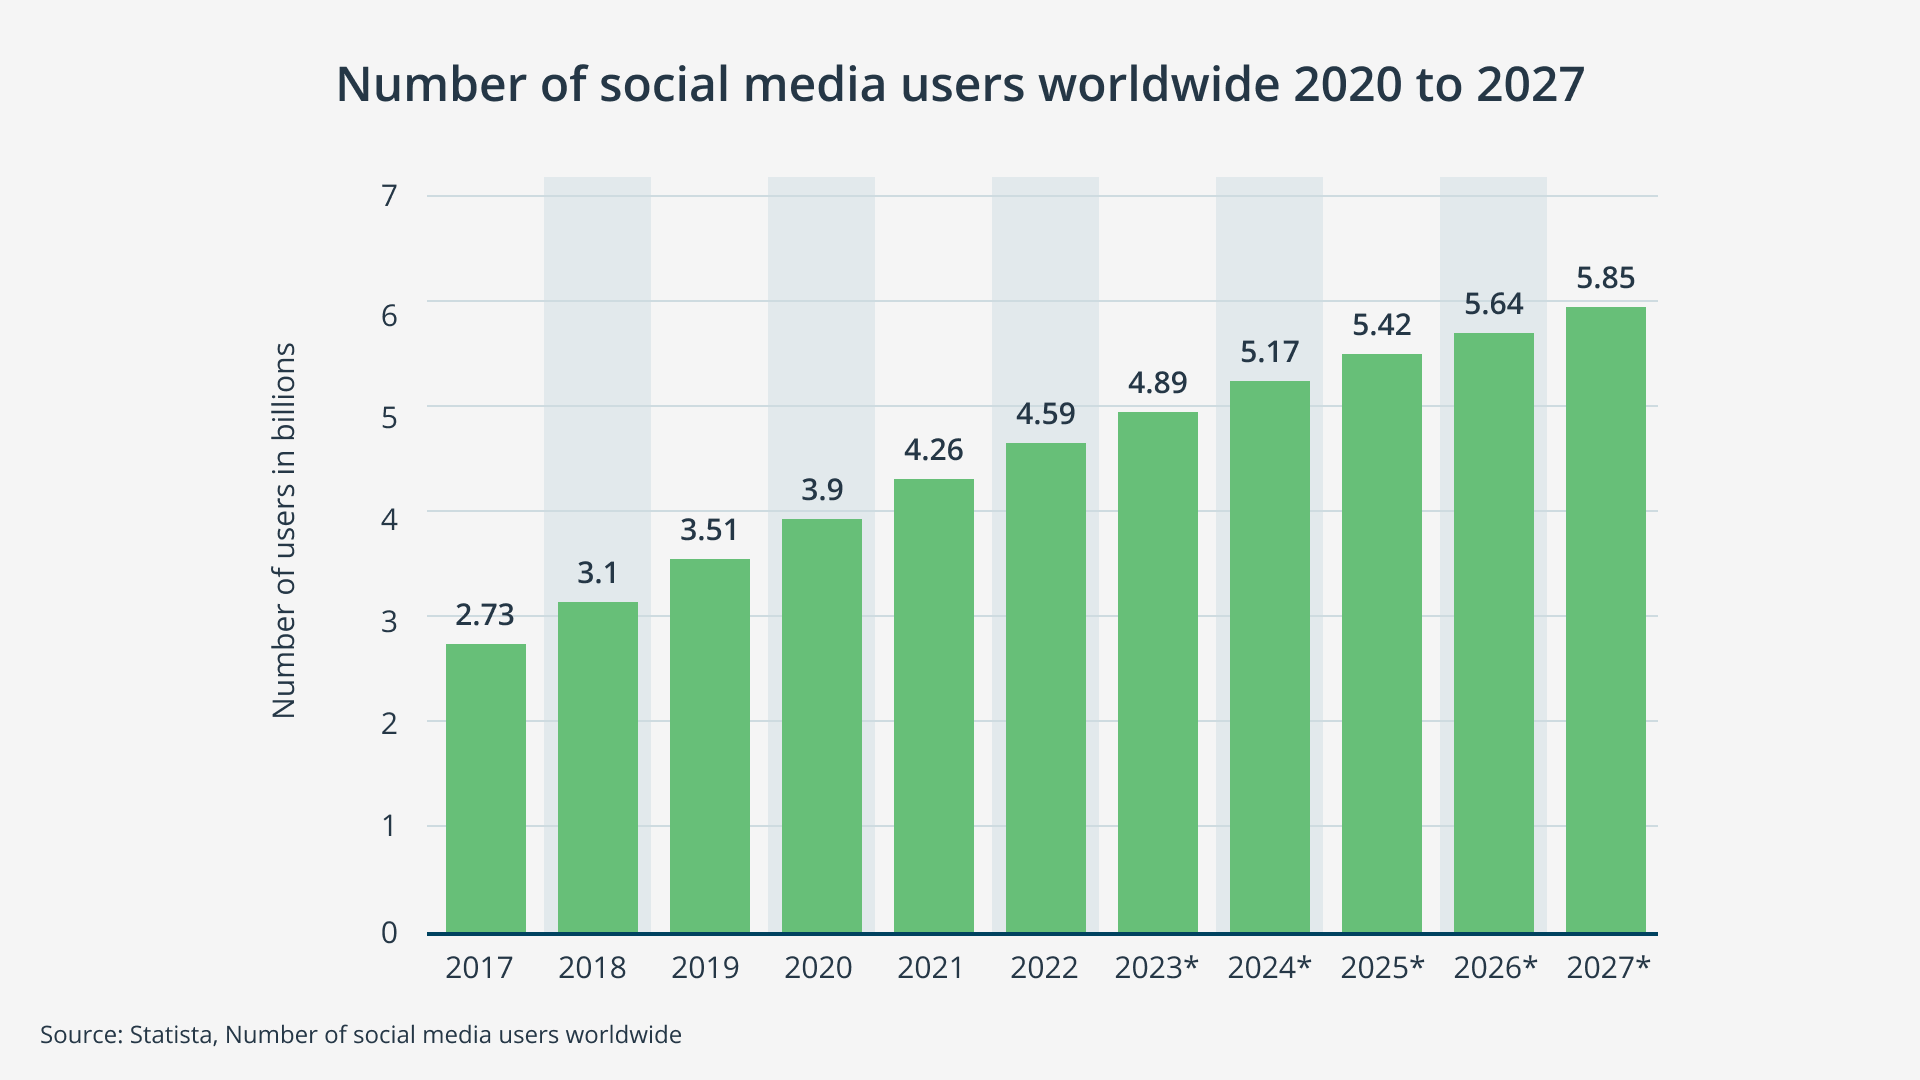 4.59 billion people use social media in 2022, and this number is expected to rise to 5.85 by 2027